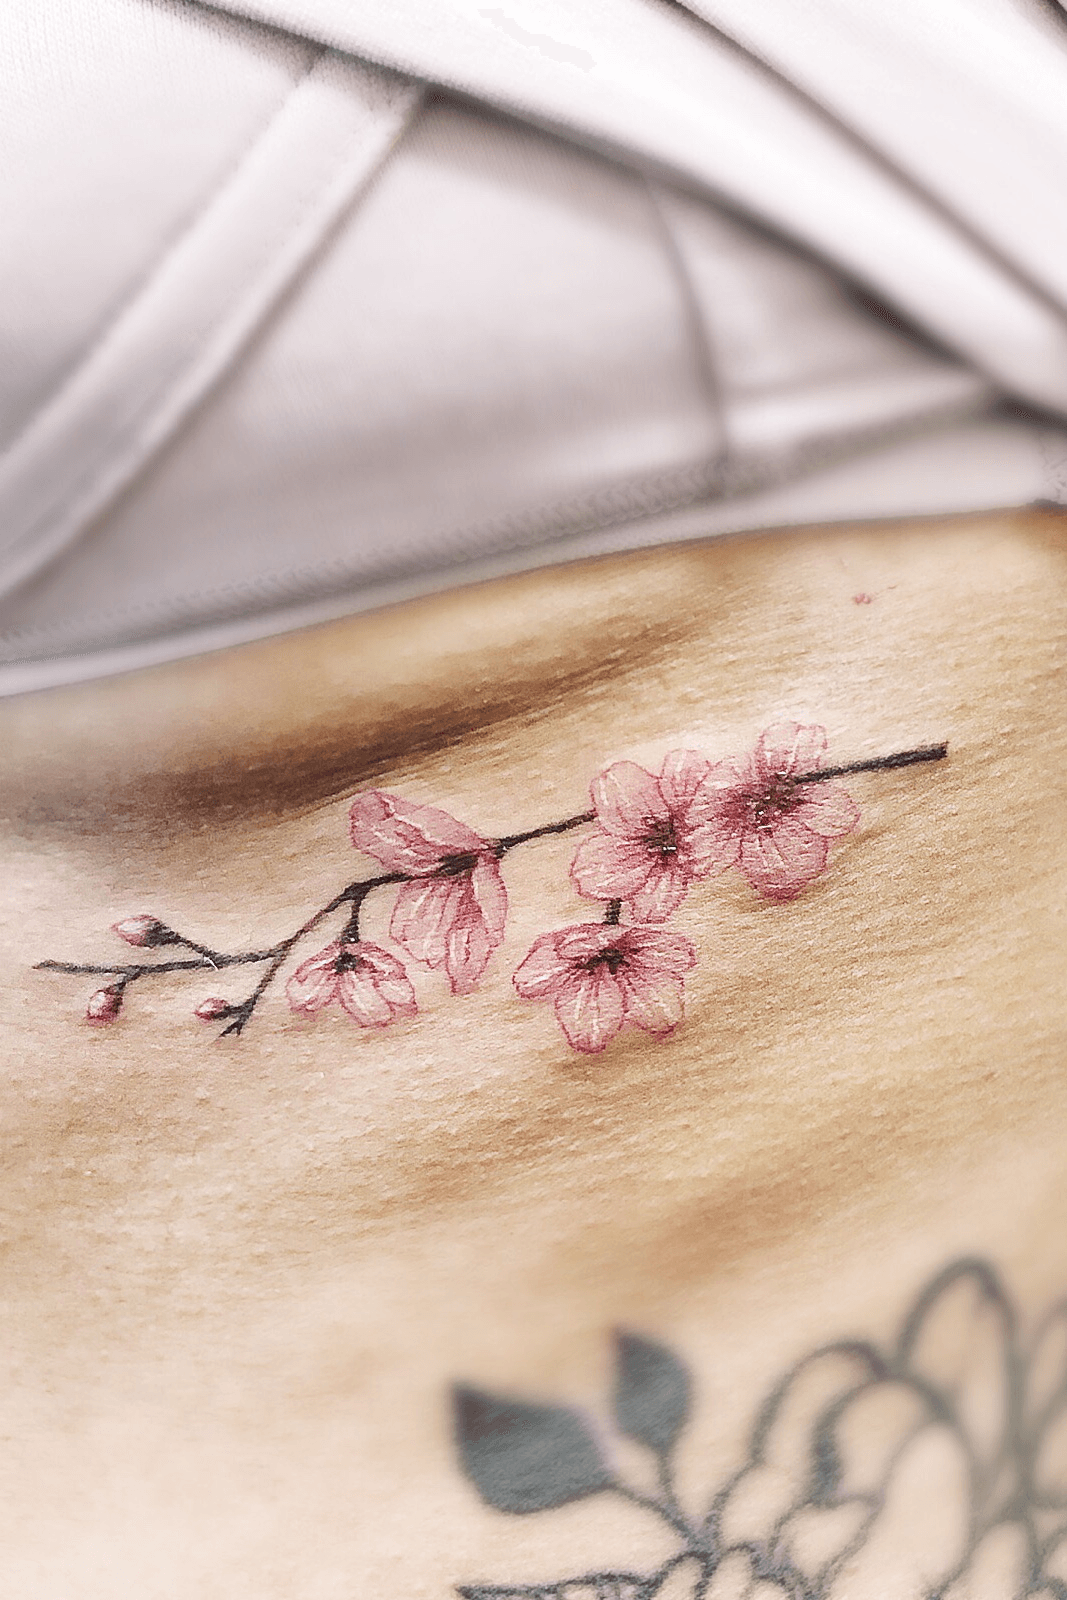 250 Japanese Cherry Blossom Tattoo Designs With Meanings  Symbolism 2023